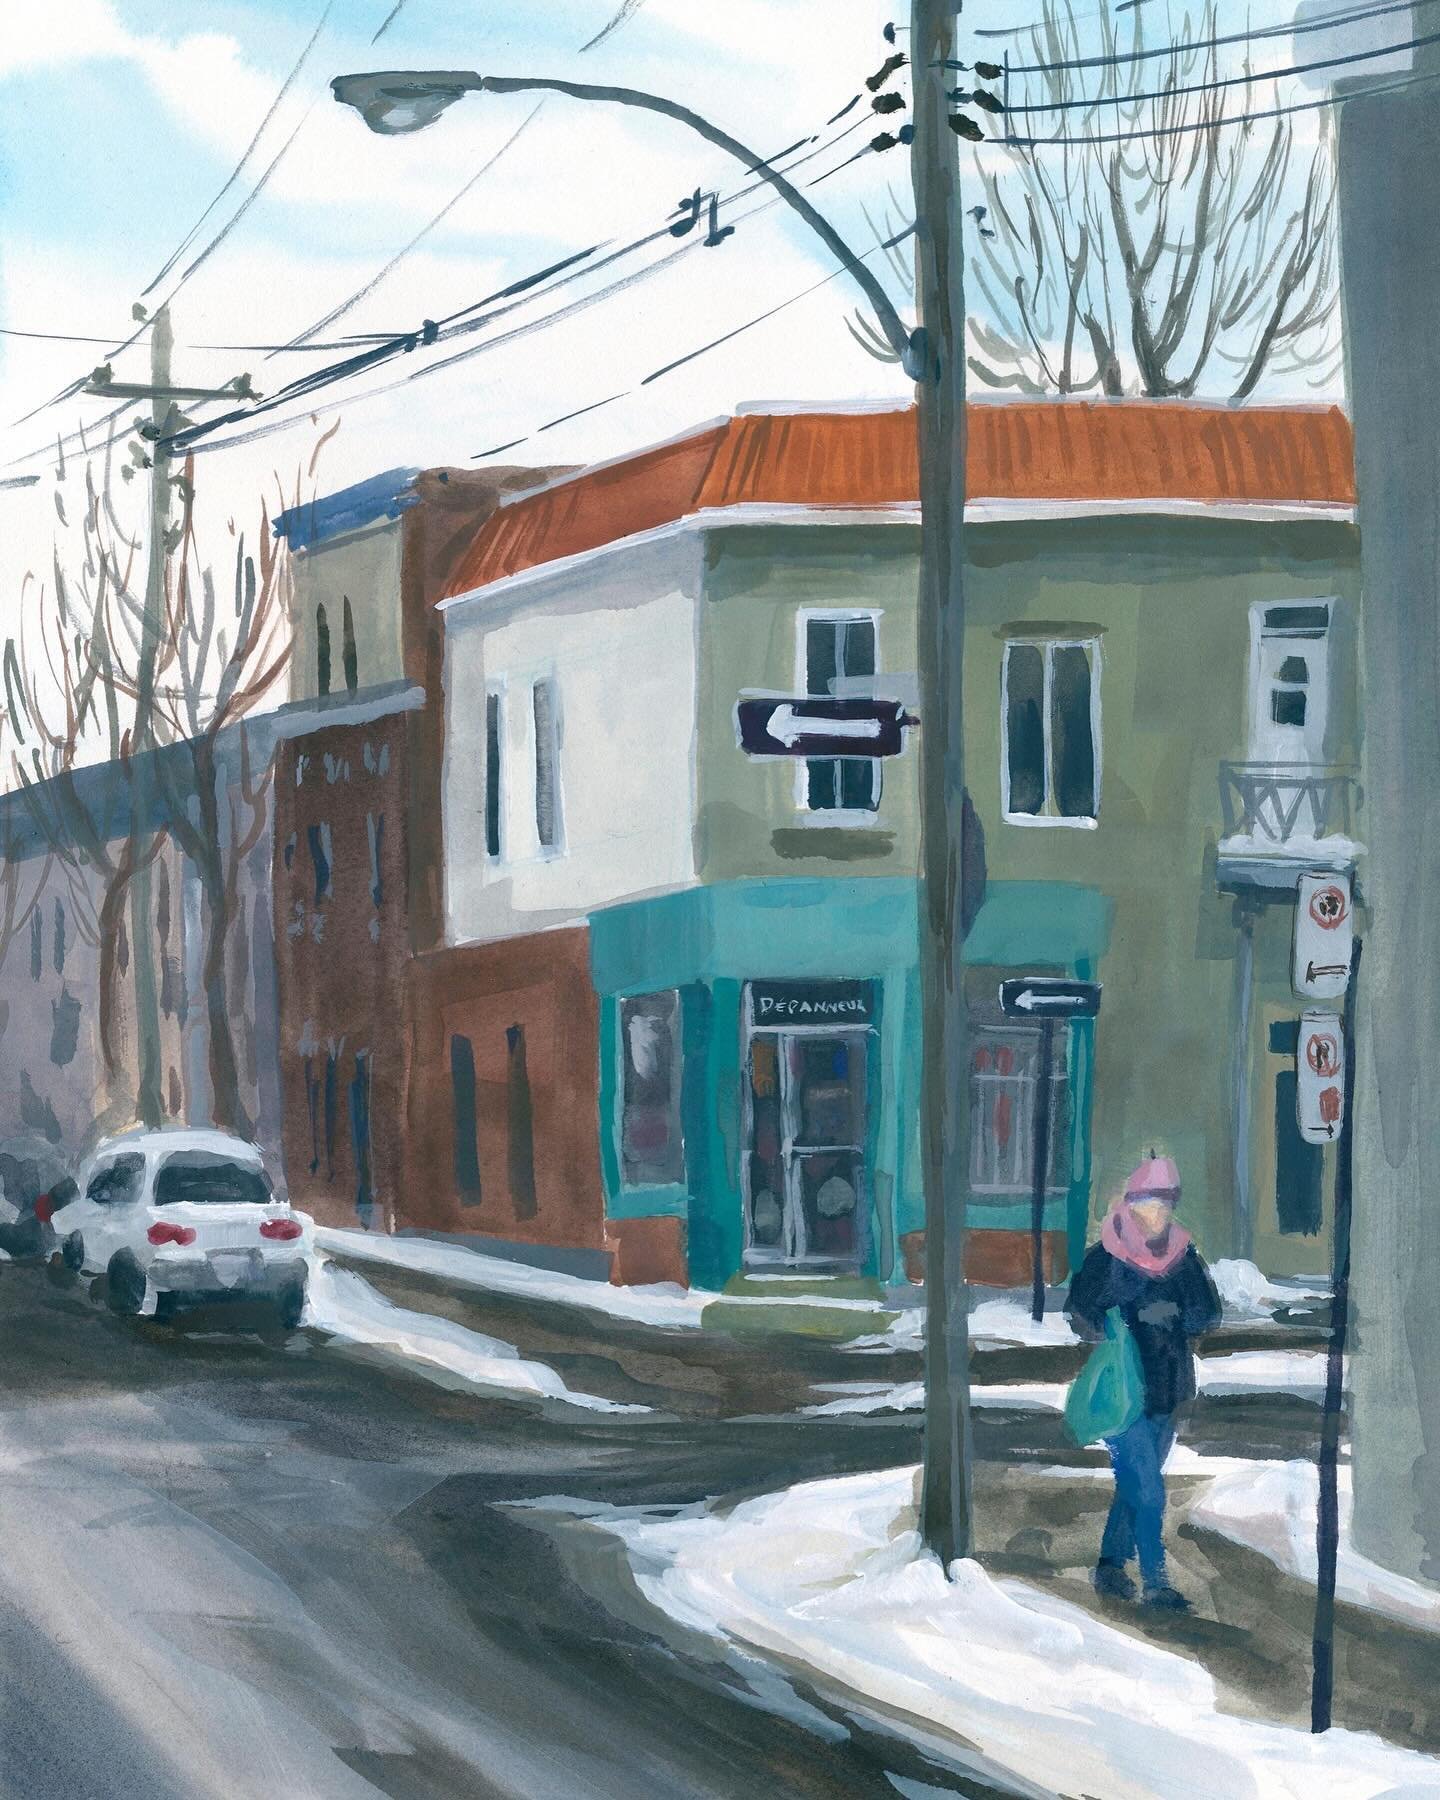 A classic sight on many Montr&eacute;al street corners: the d&eacute;panneur &ndash; corner store &ndash; where last-minute or forgotten items can be picked up. 🤗

Picking up a few Things (D&eacute;panneur). Gouache on watercolour paper.

👉 This is